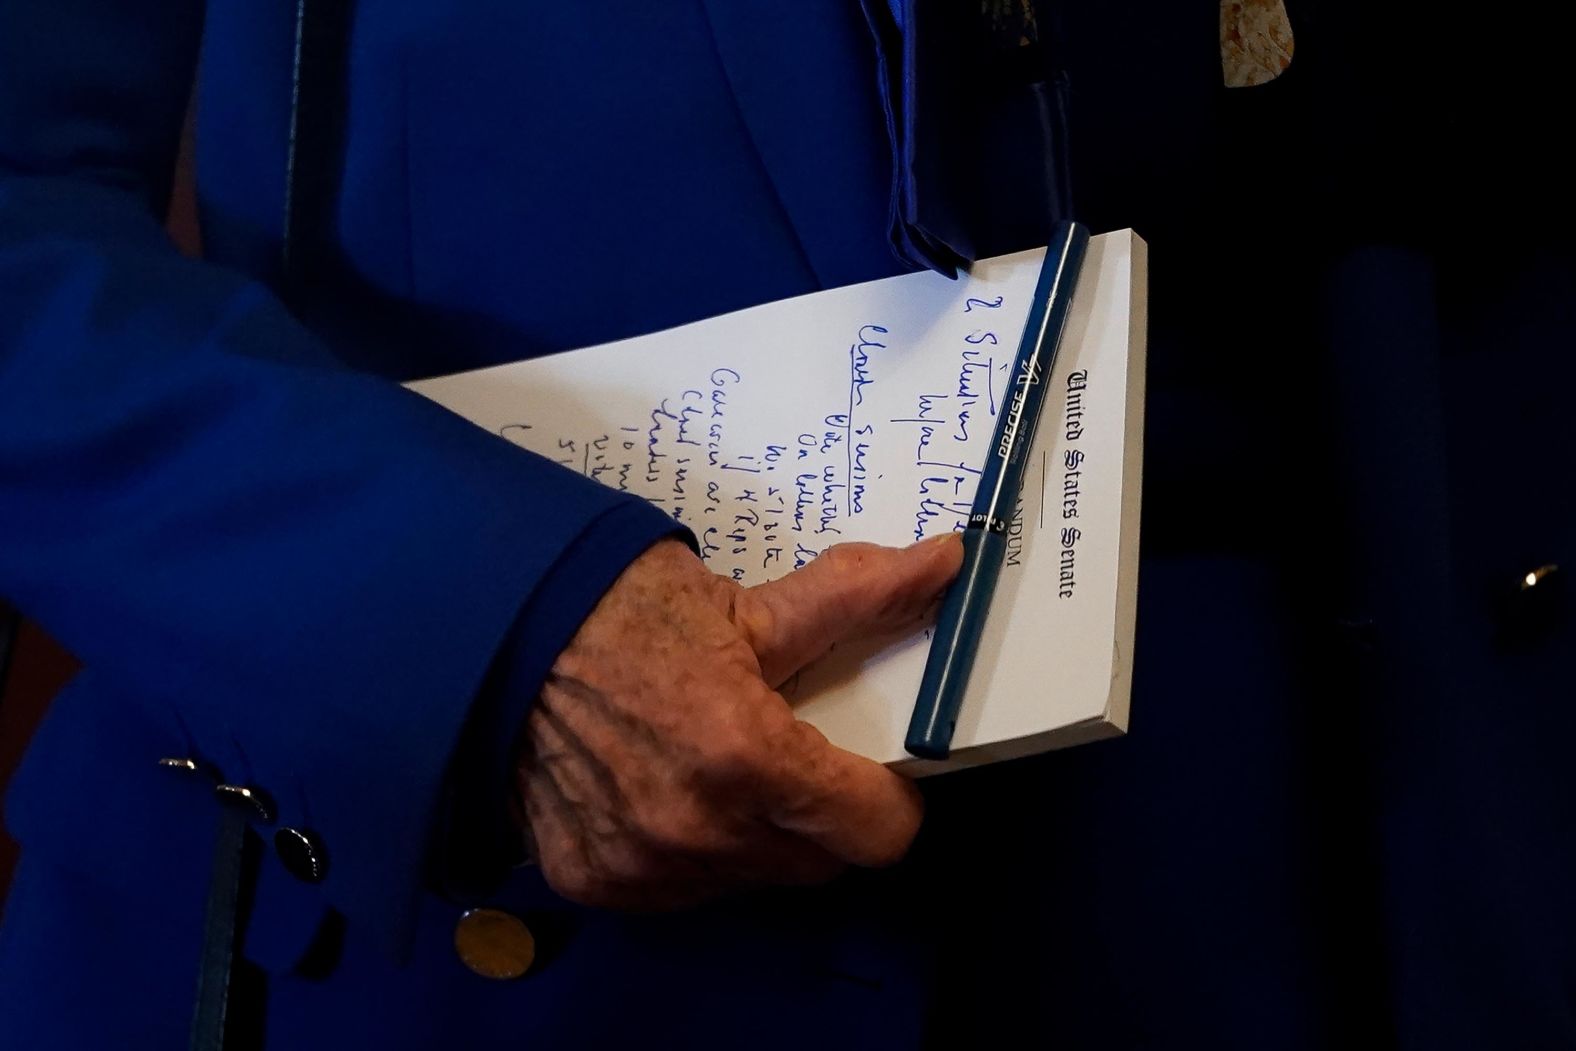 US Sen. Dianne Feinstein carries a notepad with her as she arrives at the Senate chamber on January 28.